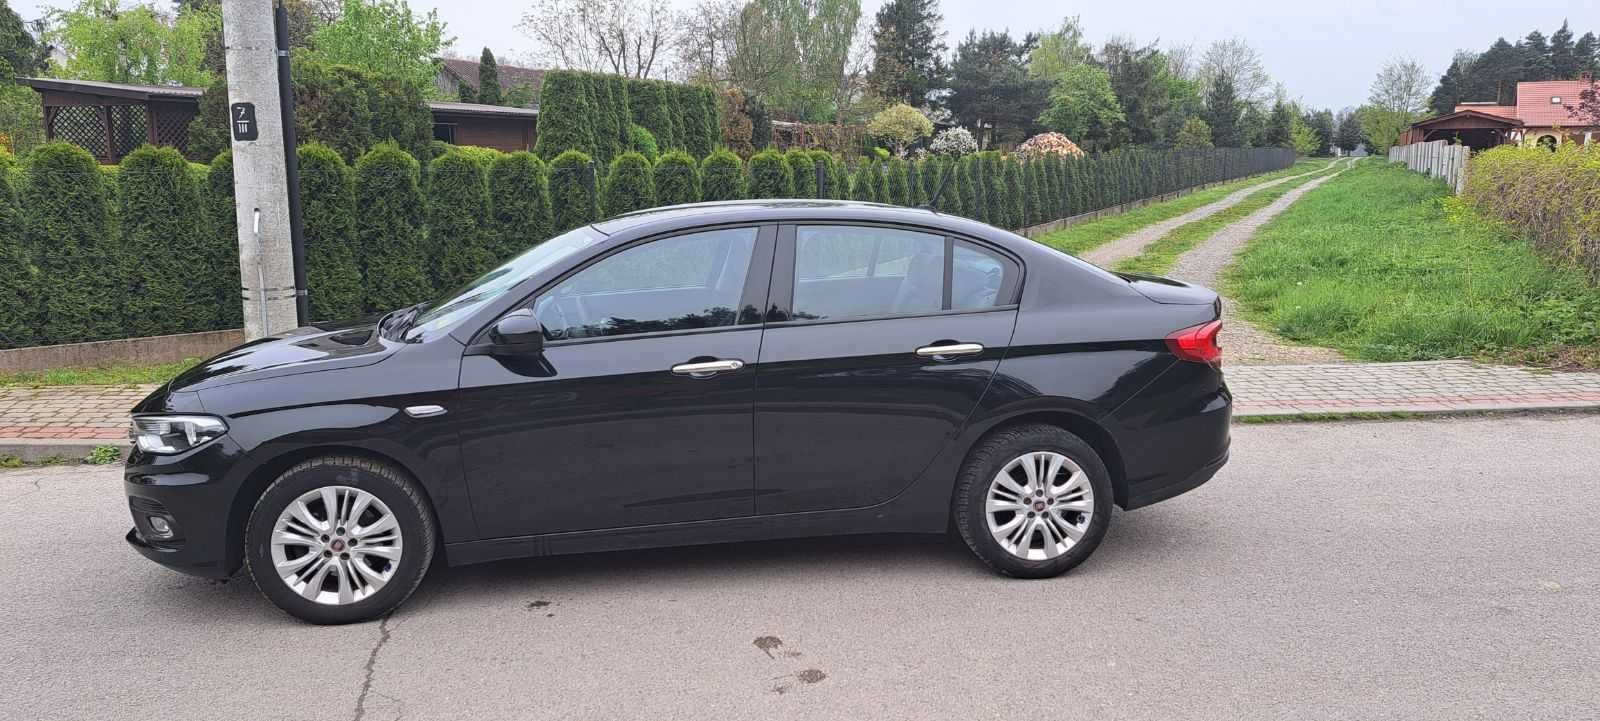 Fiat Tipo 1.4 benzyna 2017